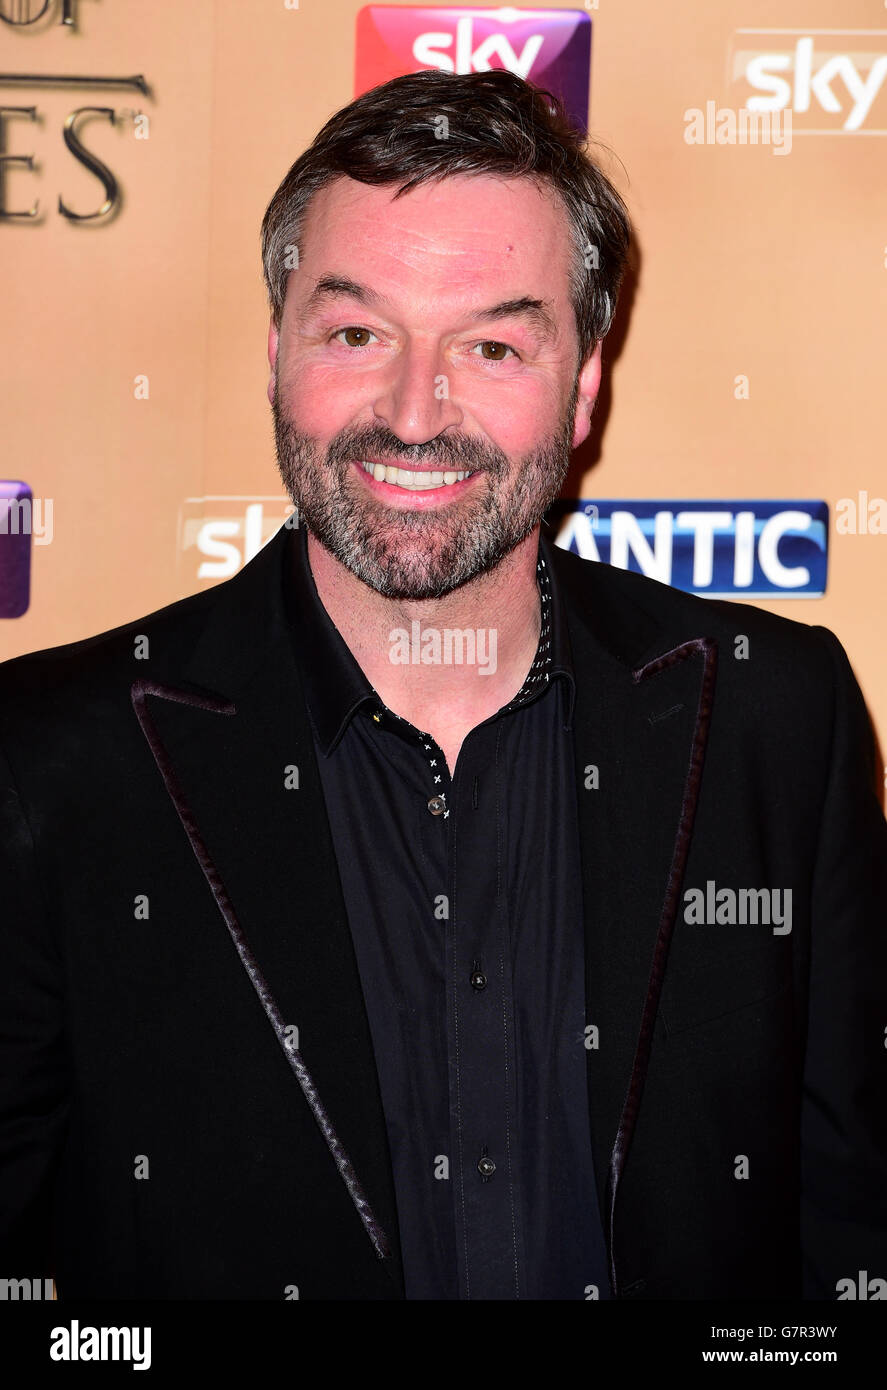 Ian Beattie attending the world premiere of the fifth series of Game of Thrones at the Tower of London. PRESS ASSOCIATION Photo. Picture date: Wednesday March 18, 2015. See PA story SHOWBIZ Thrones. Photo credit should read: Ian West/PA Wire Stock Photo